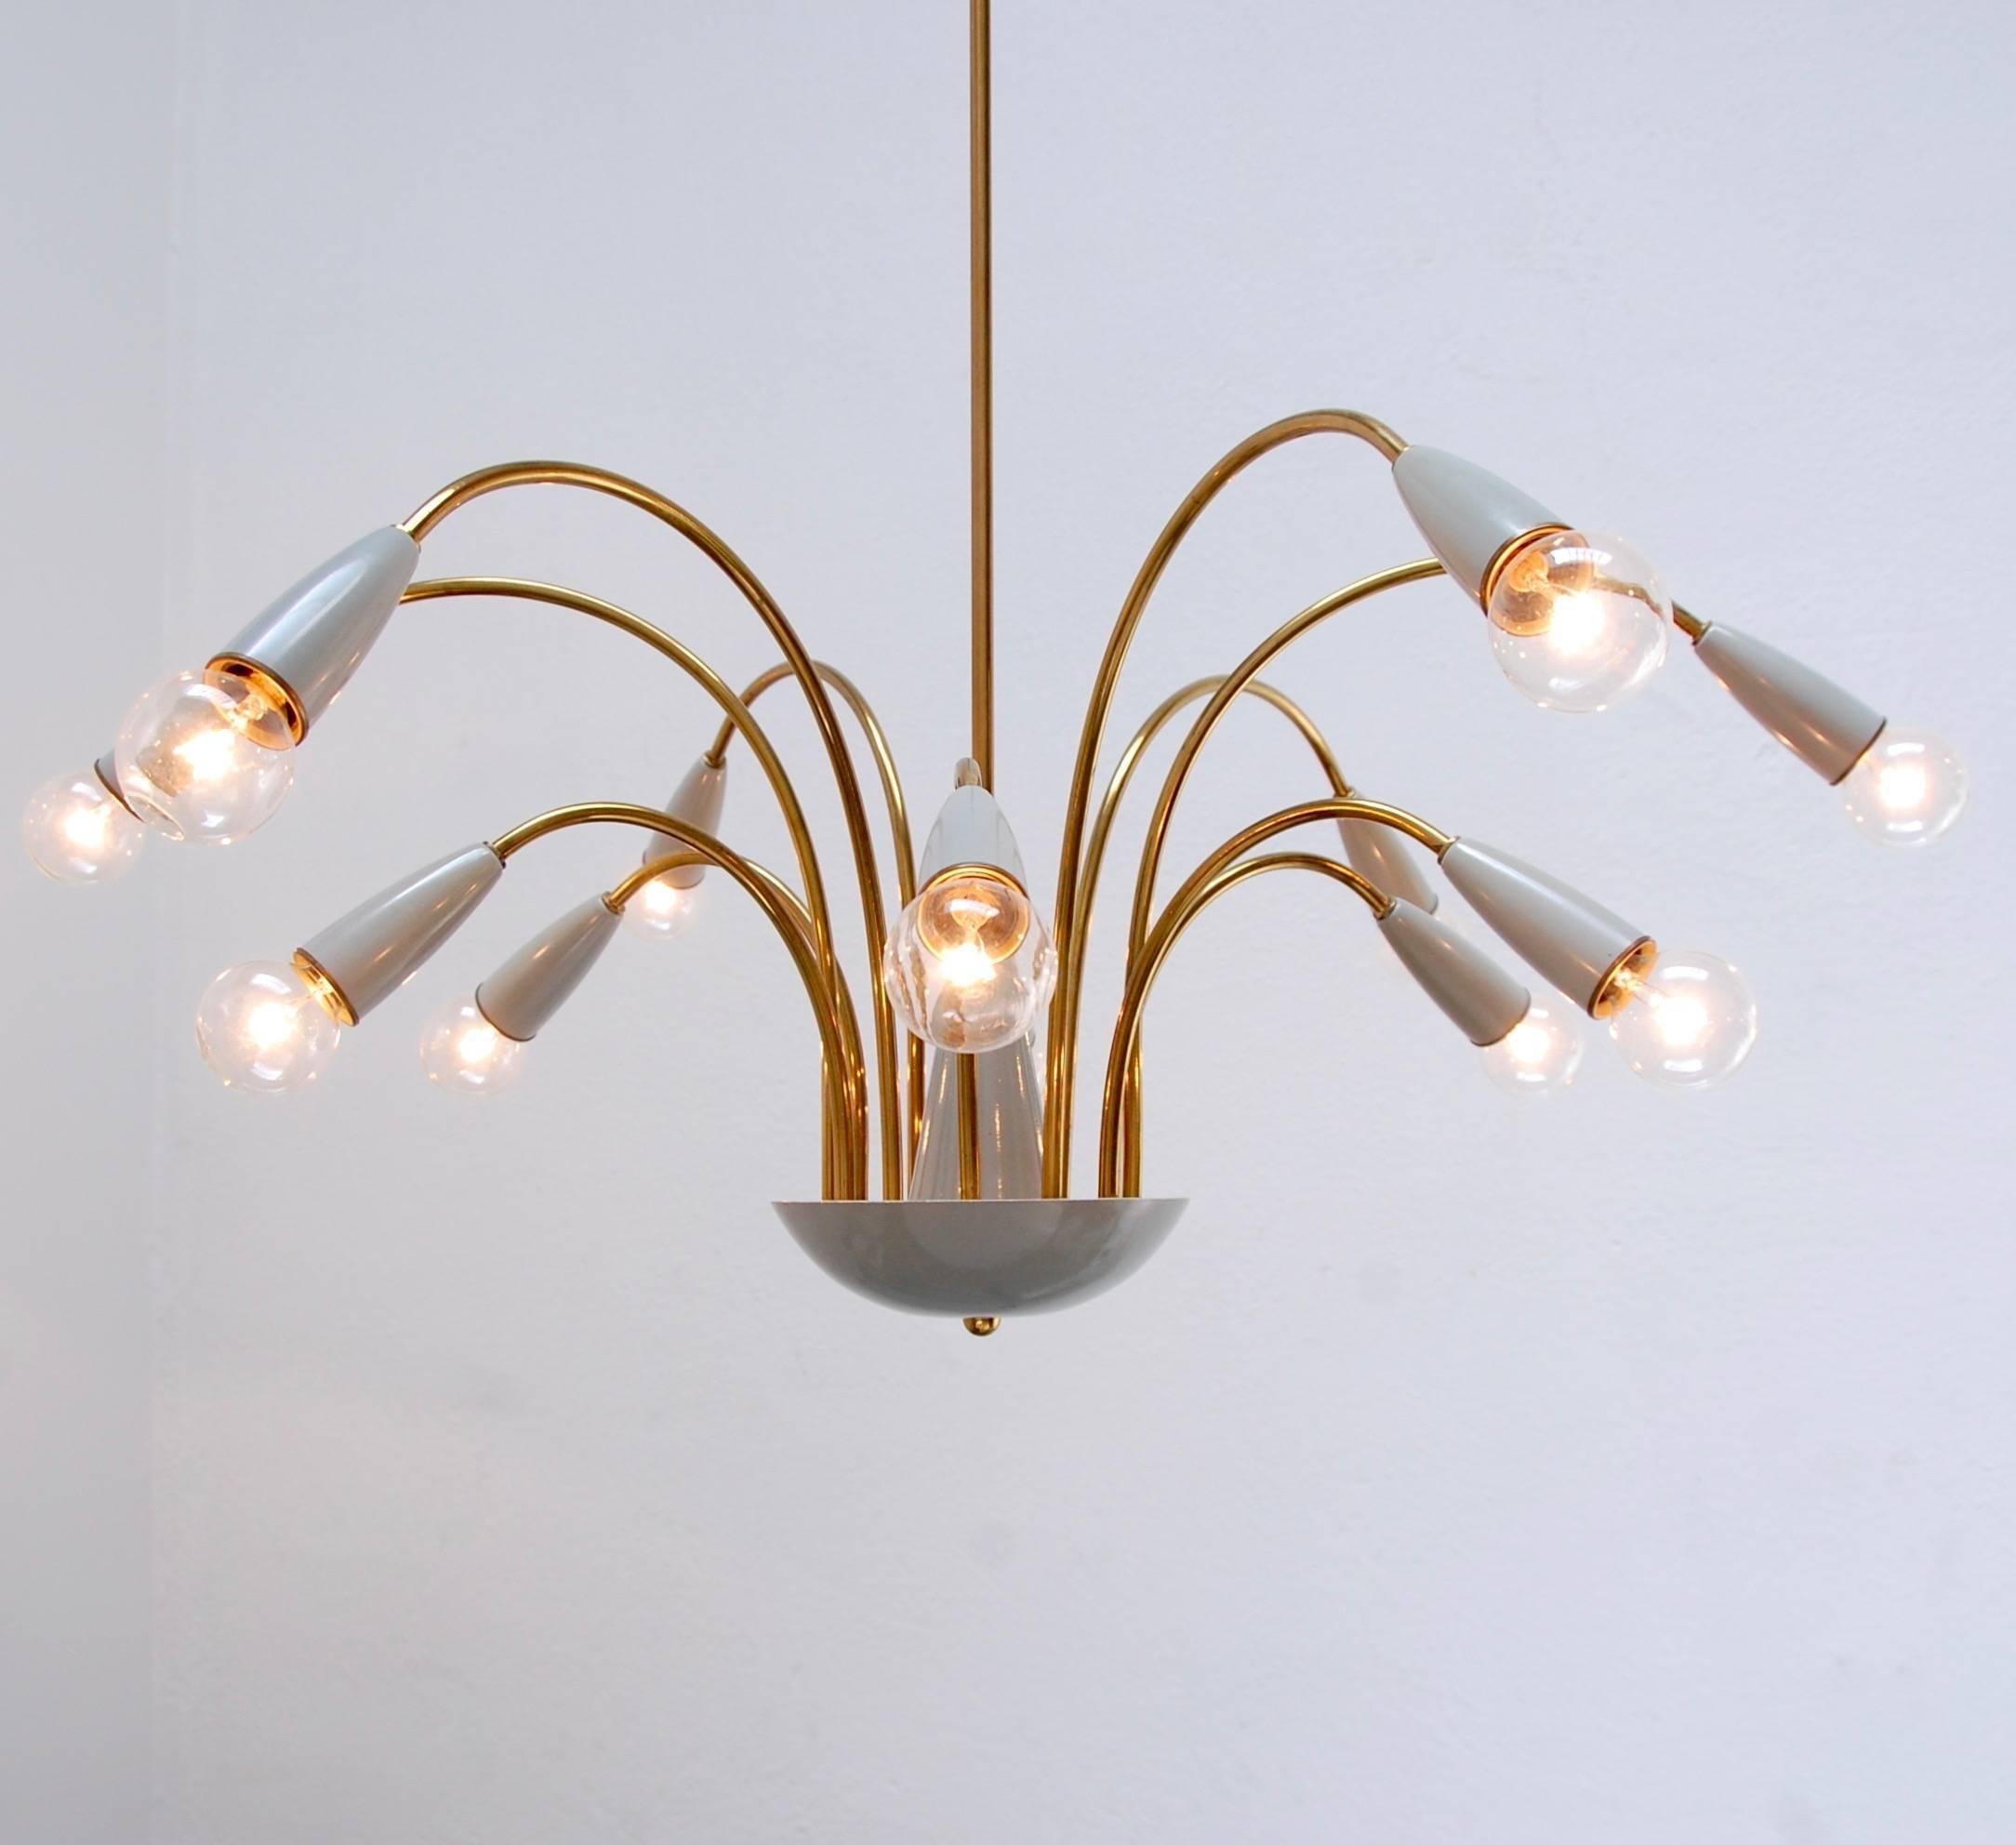 Italian Botanical 1960s Chandelier from Italy